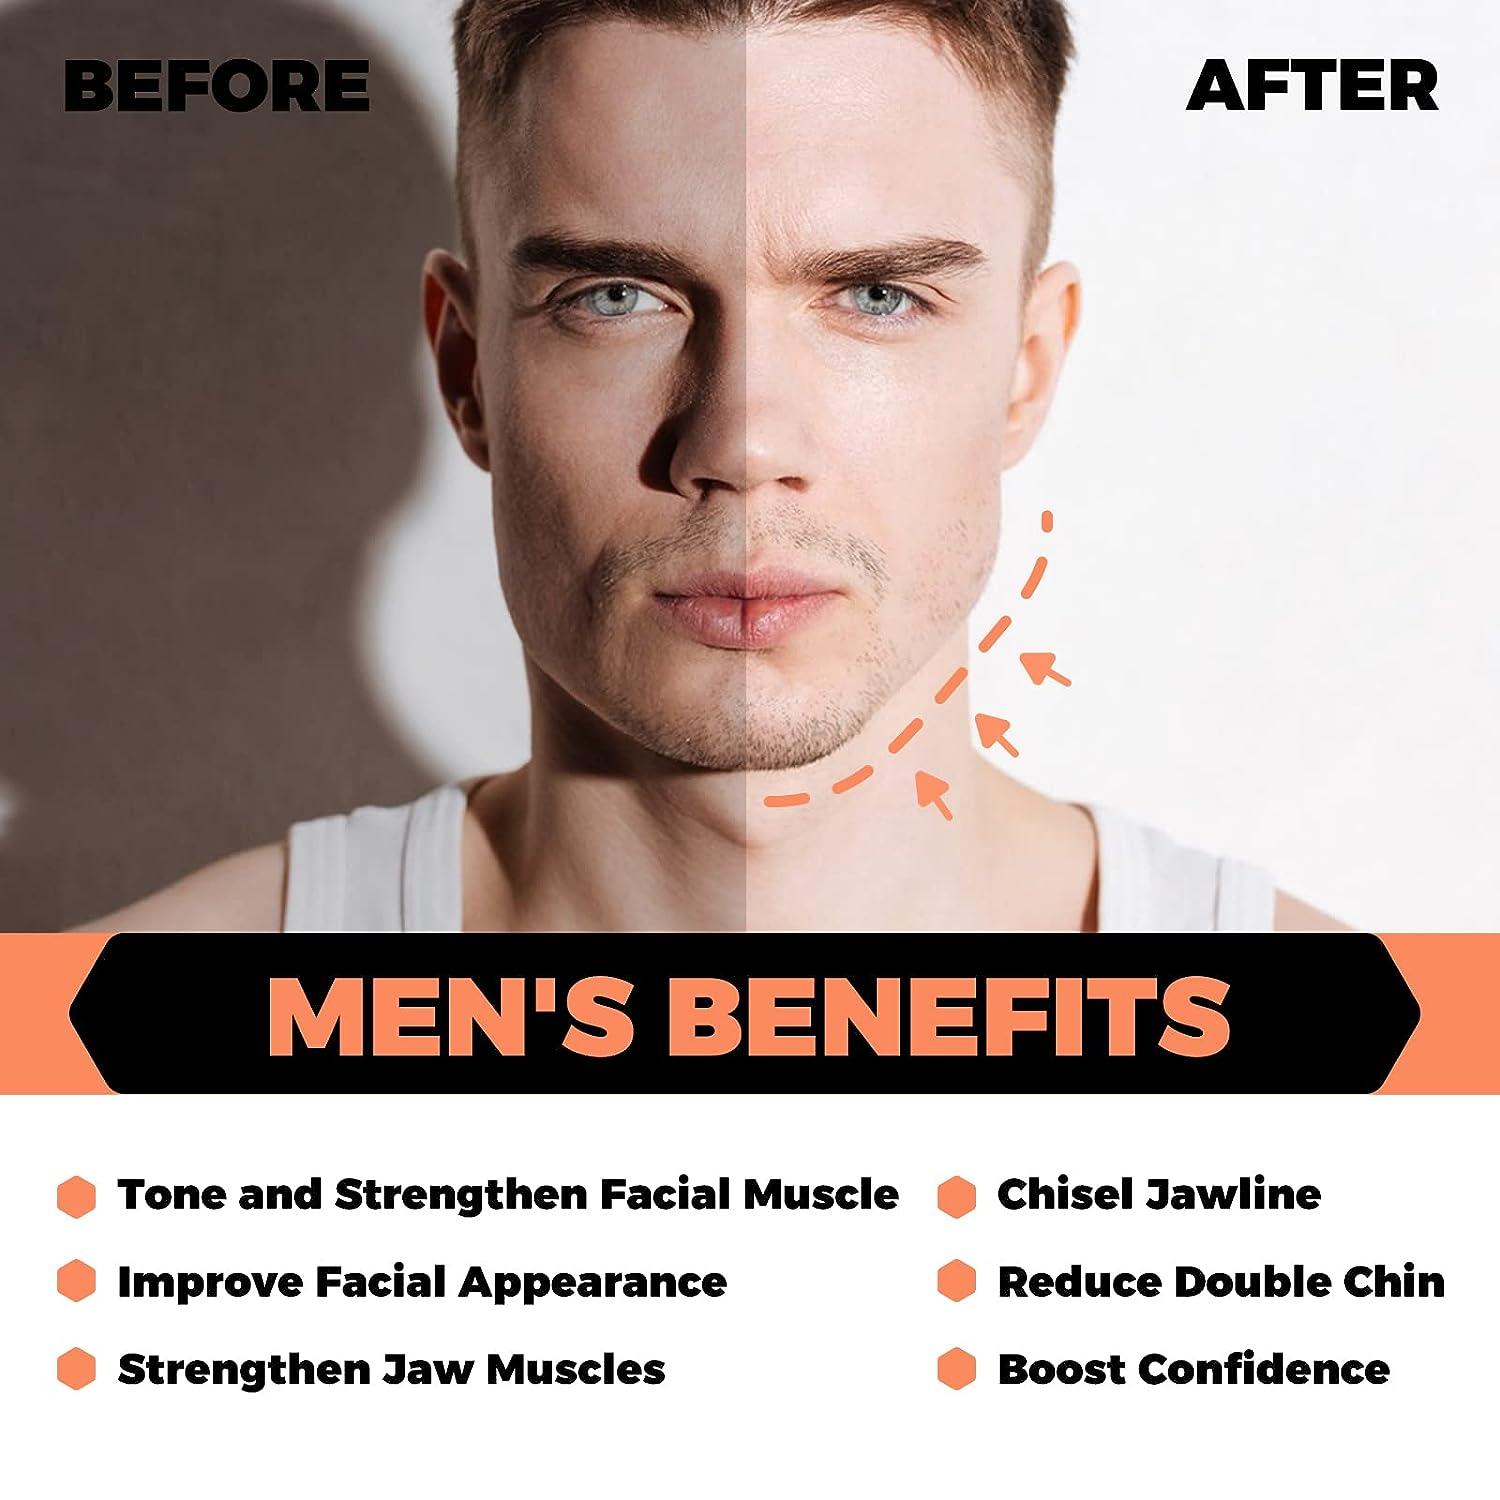 Jaw Exerciser for Men & Women Jawline Exerciser Powerful Facial Exerciser  for Sculpting Jawline Reduce Double Chin Tone & Slim Facial Contour Tighten  Skin and Neck Strengthen Jaw Muscles 45lb Gray Onesize